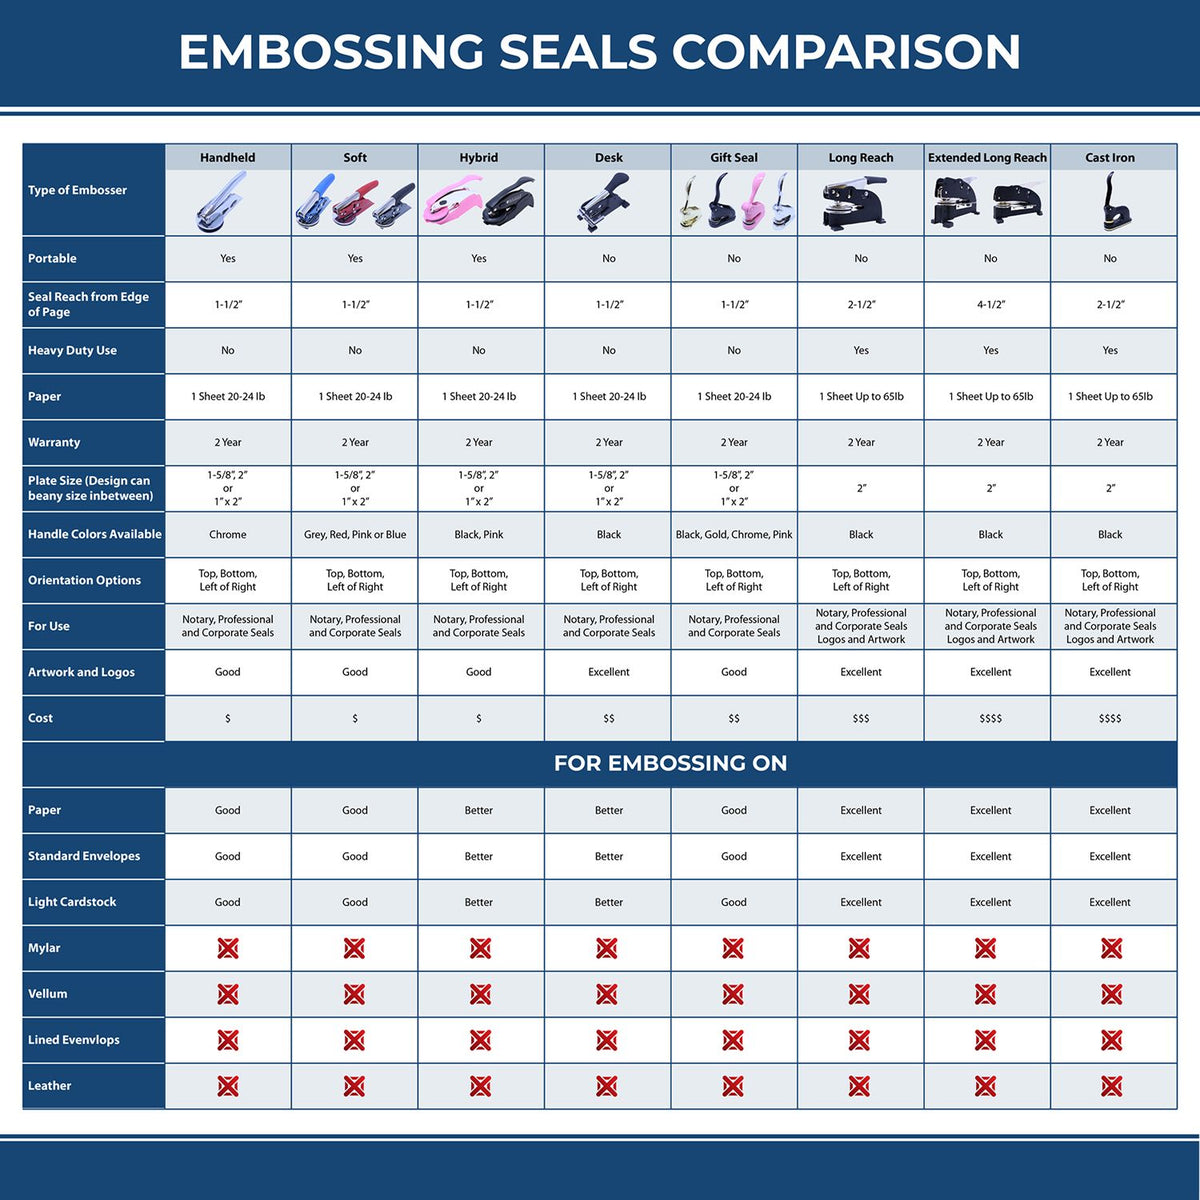 A comparison chart for the different types of mount models available for the Soft Pocket South Dakota Landscape Architect Embosser.